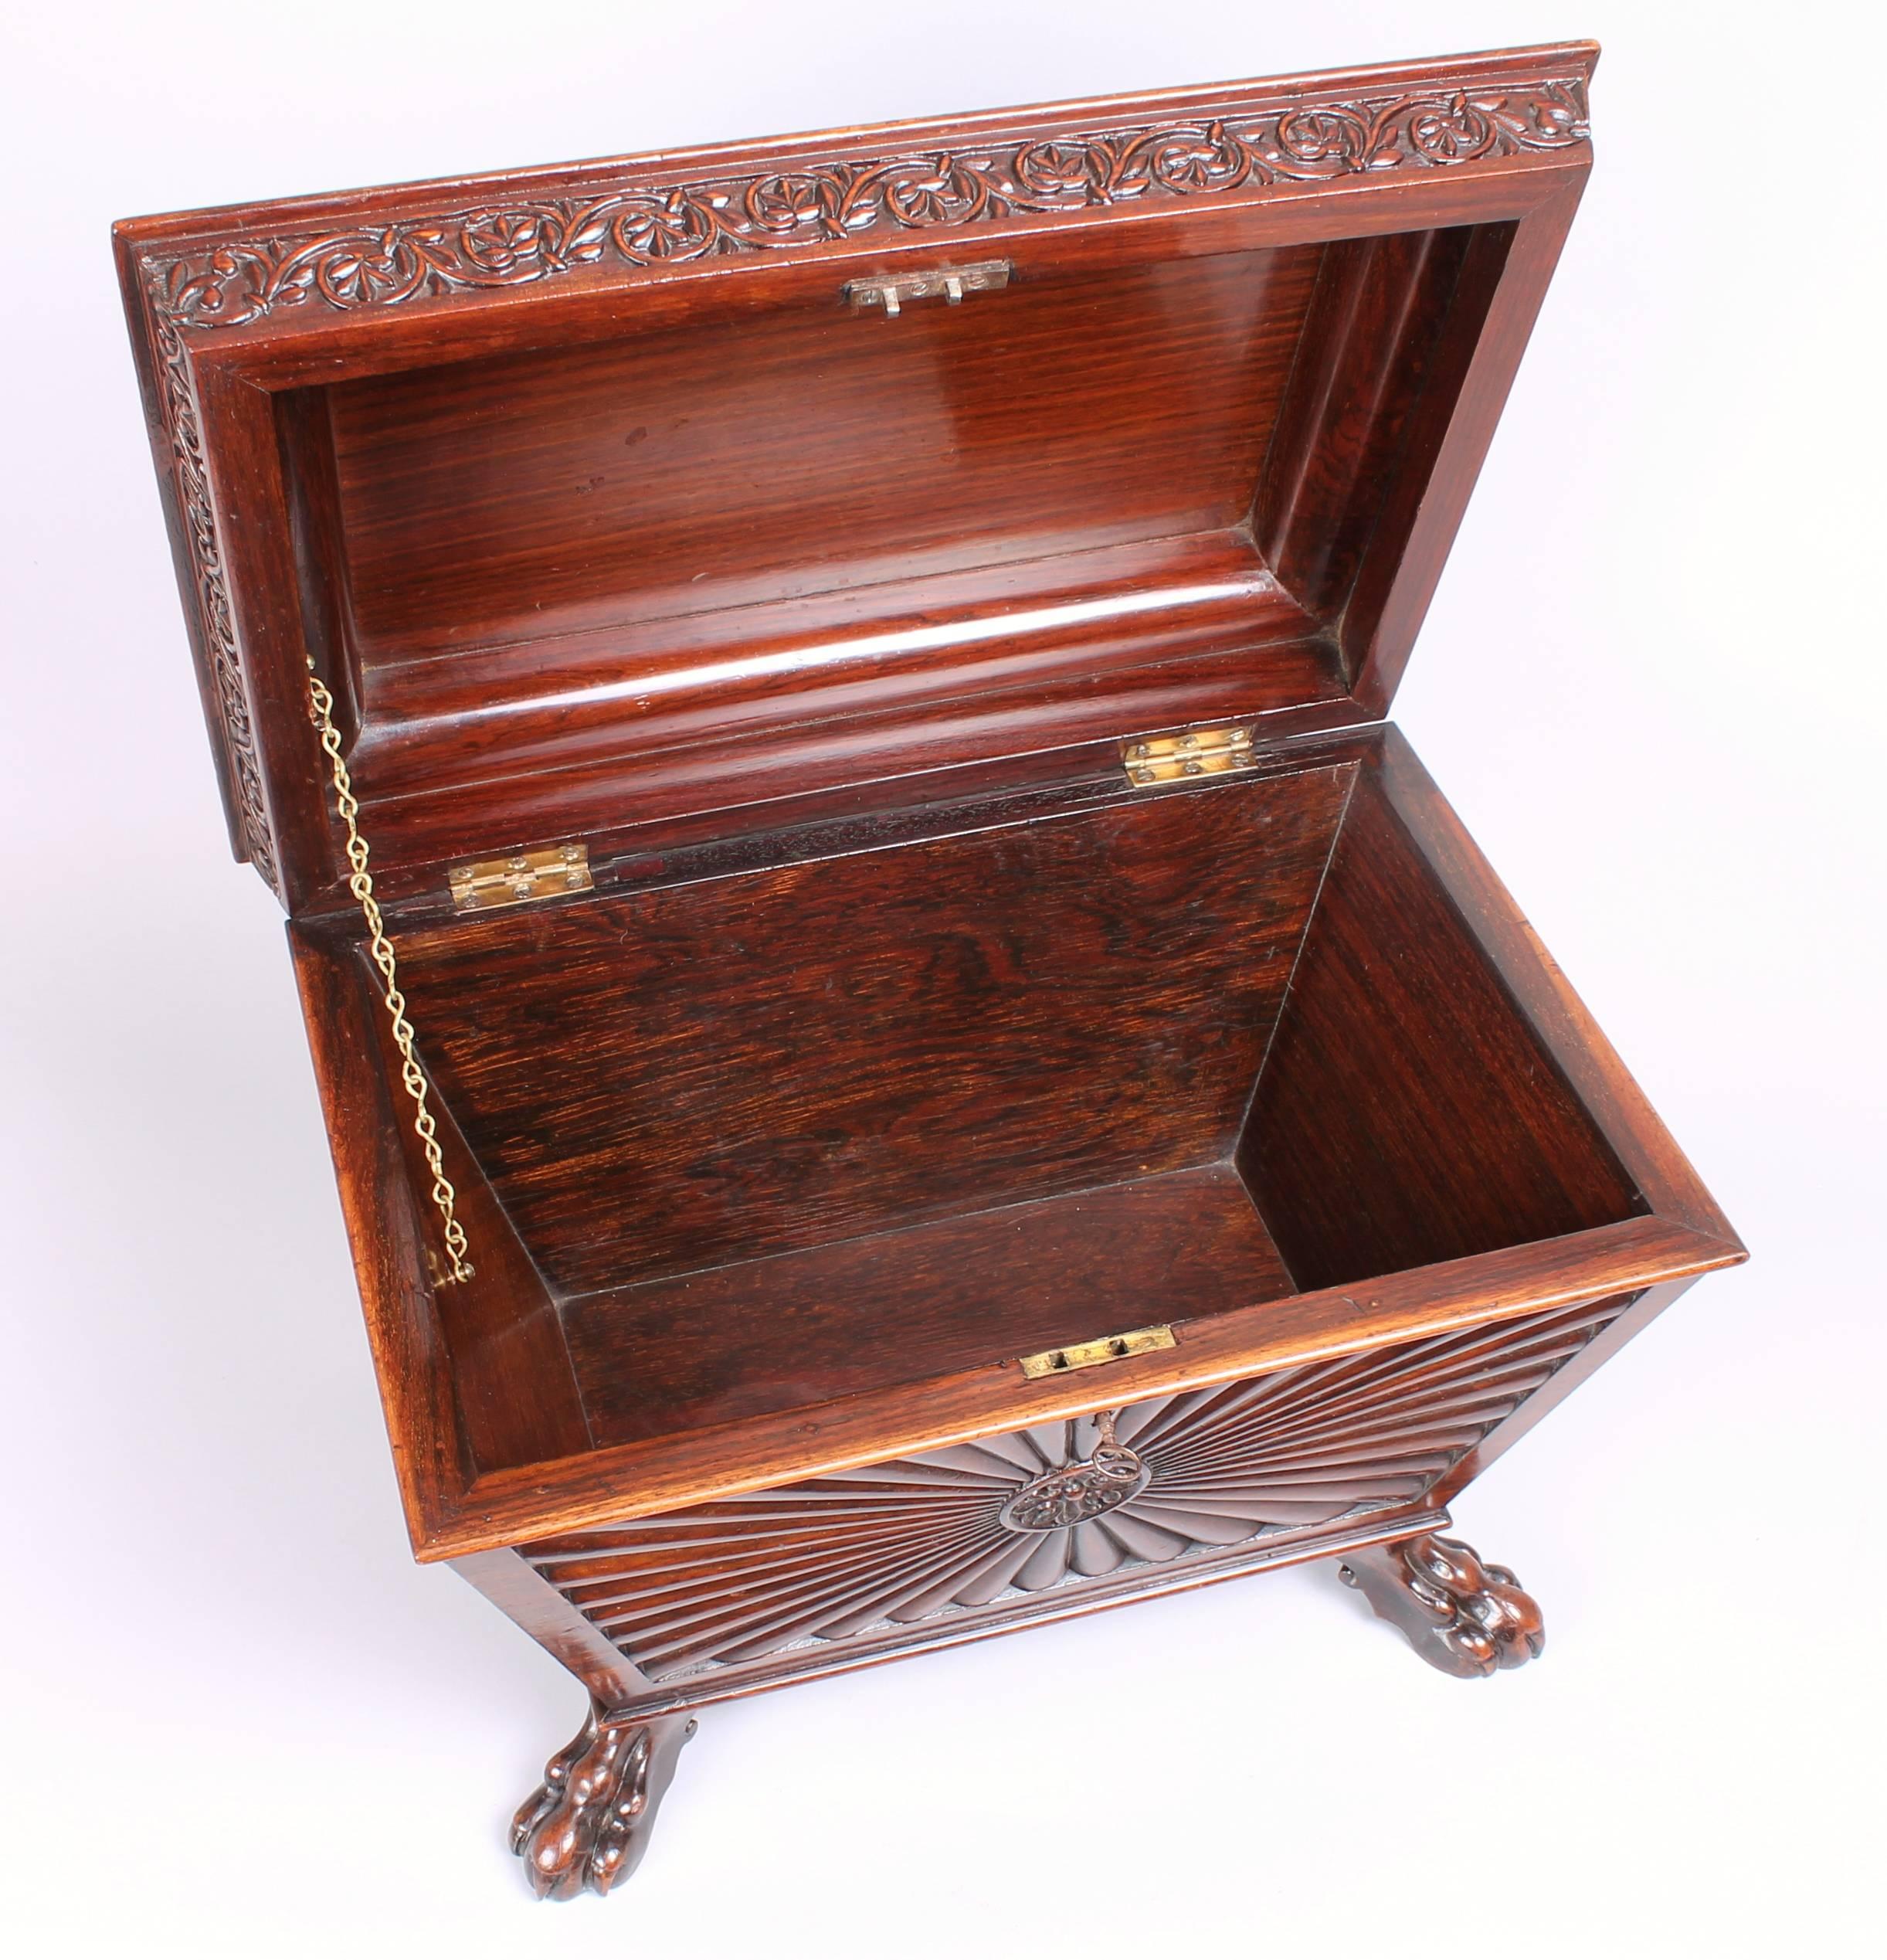 George IV period solid rosewood casket in the Anglo-Indian manner; boldly carved with reeded sunburst panels and a frieze of scrolling foliate trails, on claw feet.